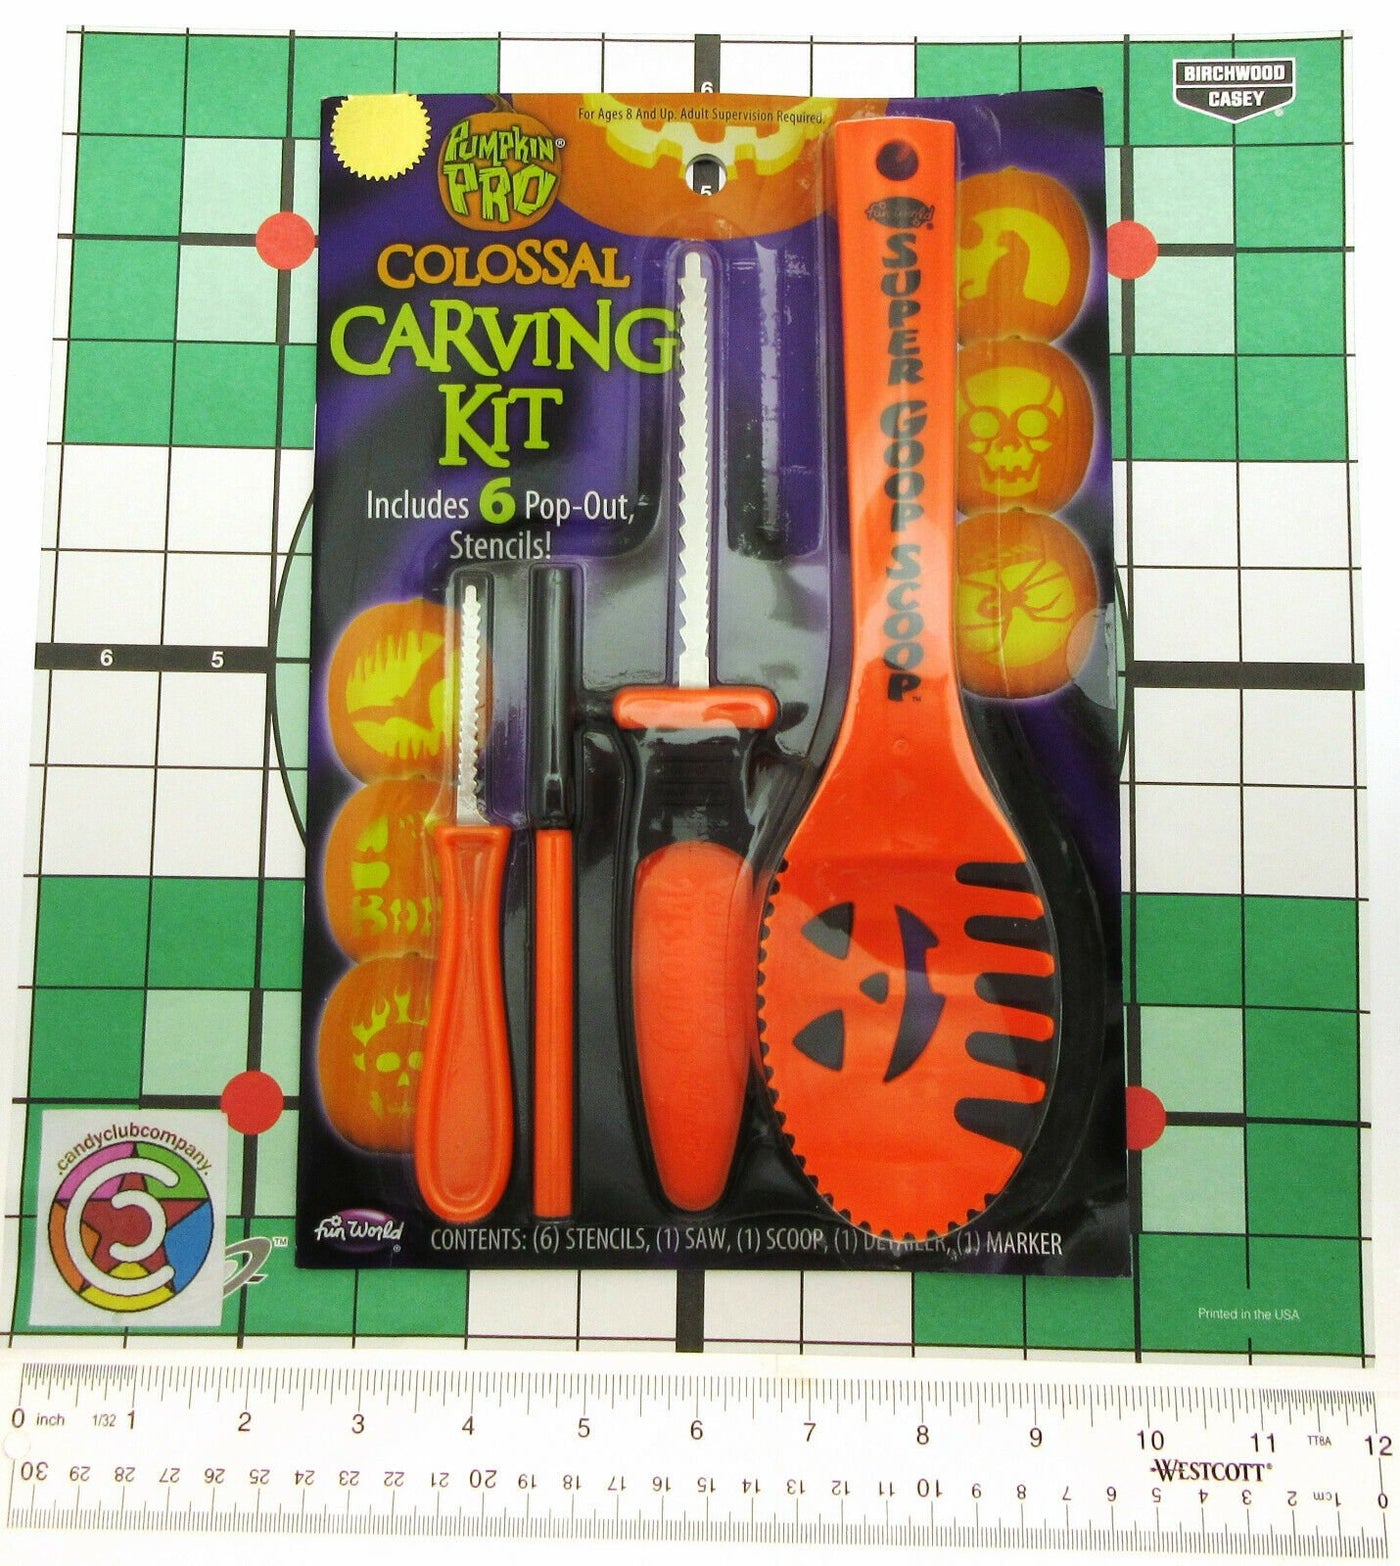 Pumpkin Pro ~ Colossal Carving Kit ~ Halloween ~ With 6 stencils!